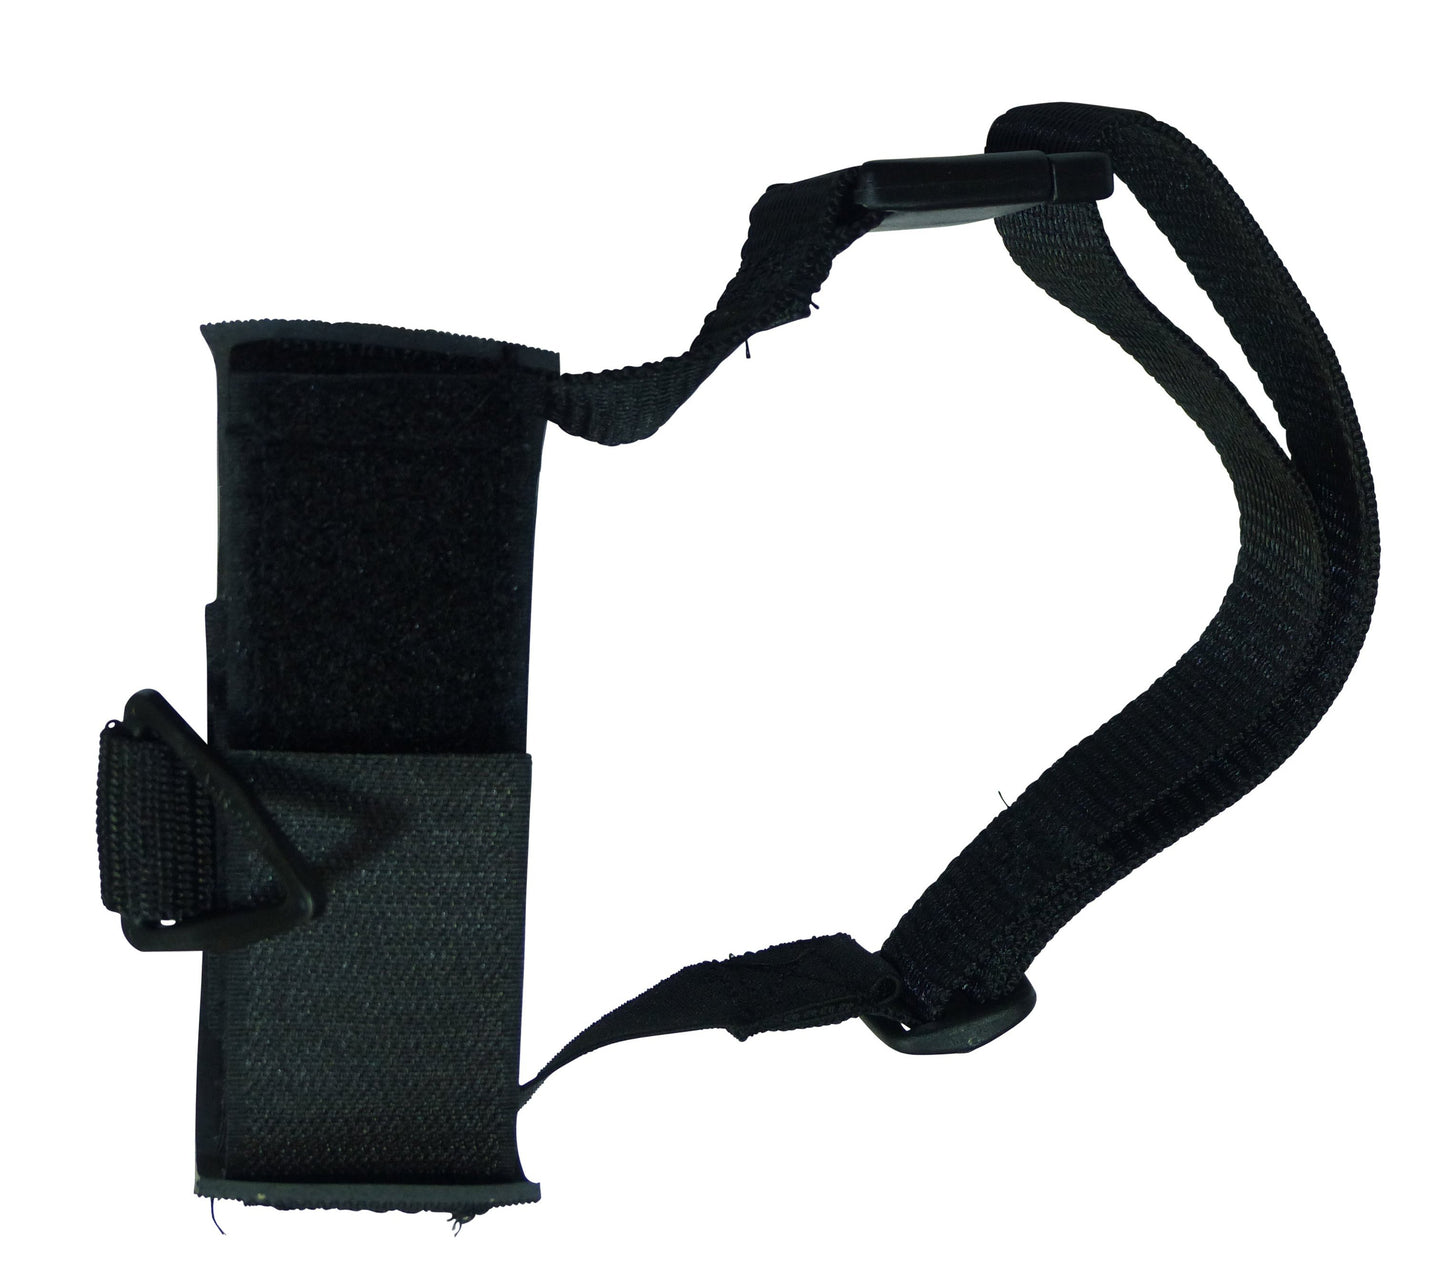 Musmate Shoe Harness for the Left Shoe